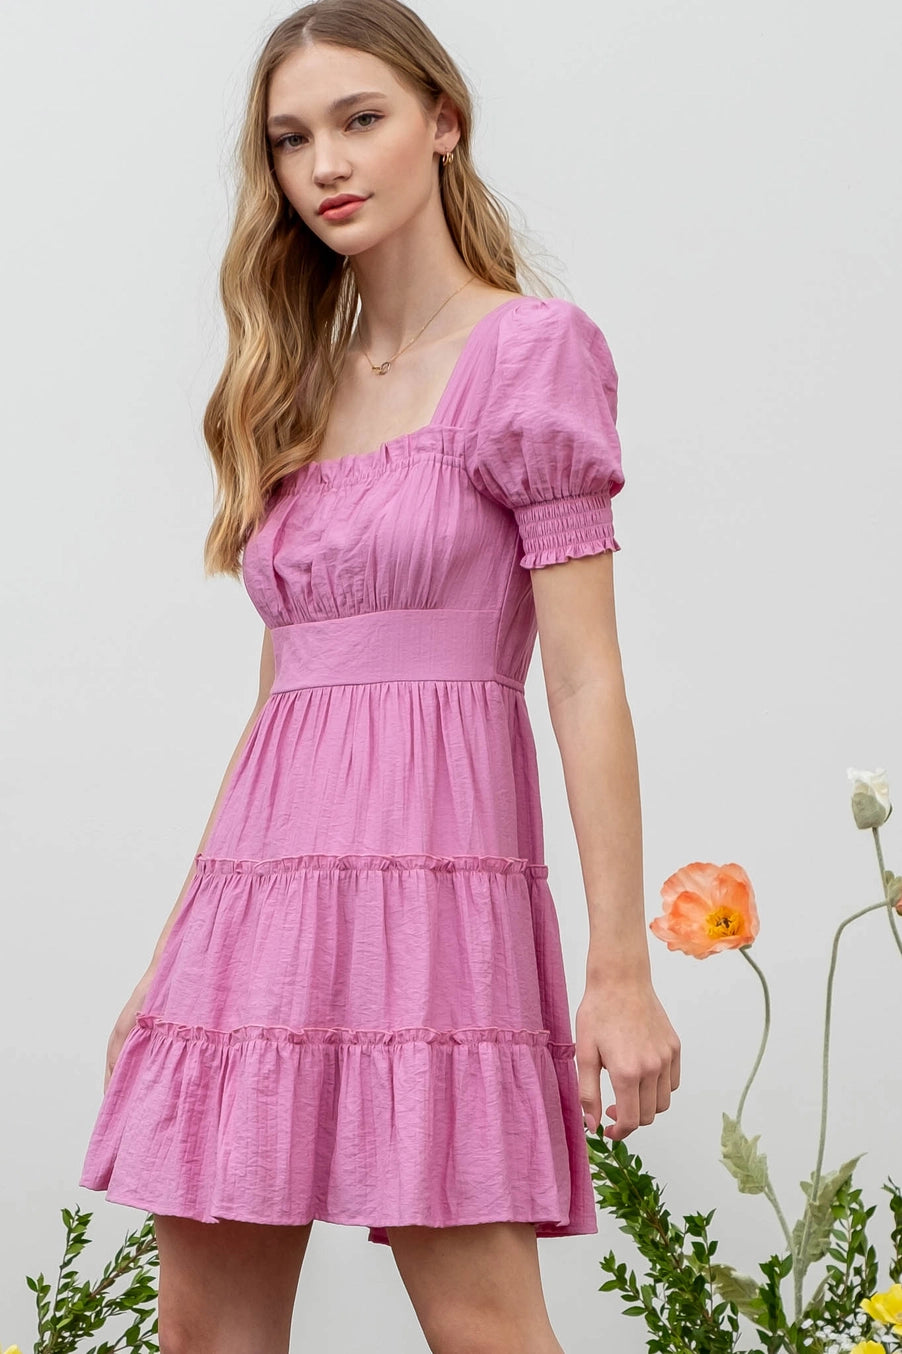 Lacy Pink Mini Dress - KC Outfitter